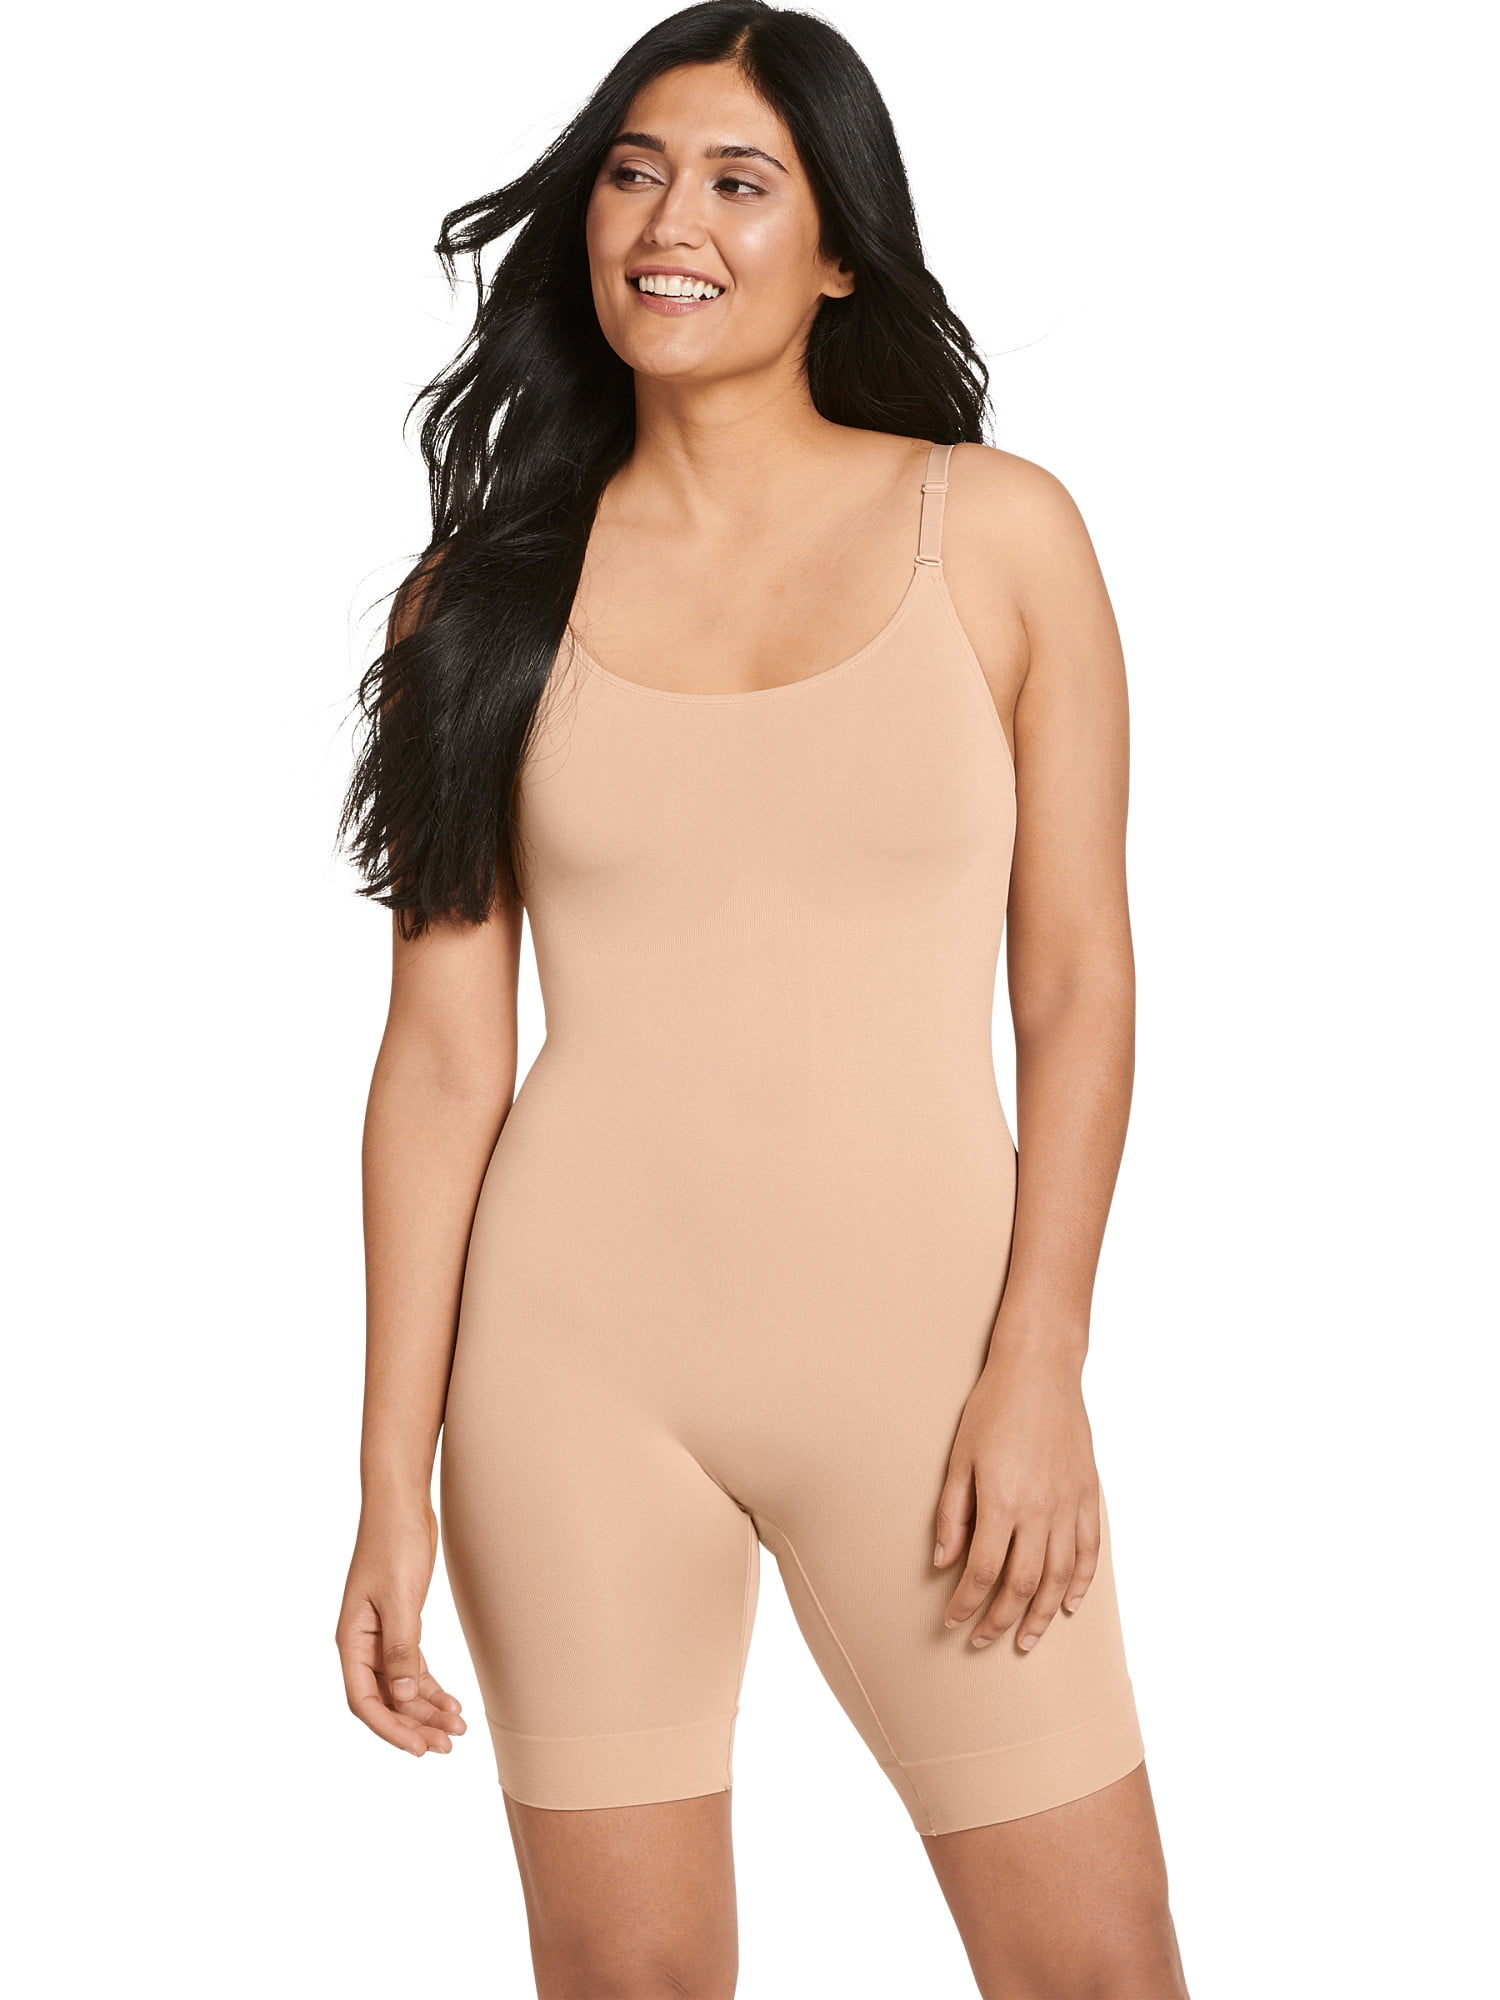 Jockey® Essentials Women's Slimming Thong Back Bodysuit, Seamfree Shapewear,  All Over Smoothing, Sizes Small-3XL, 5670 